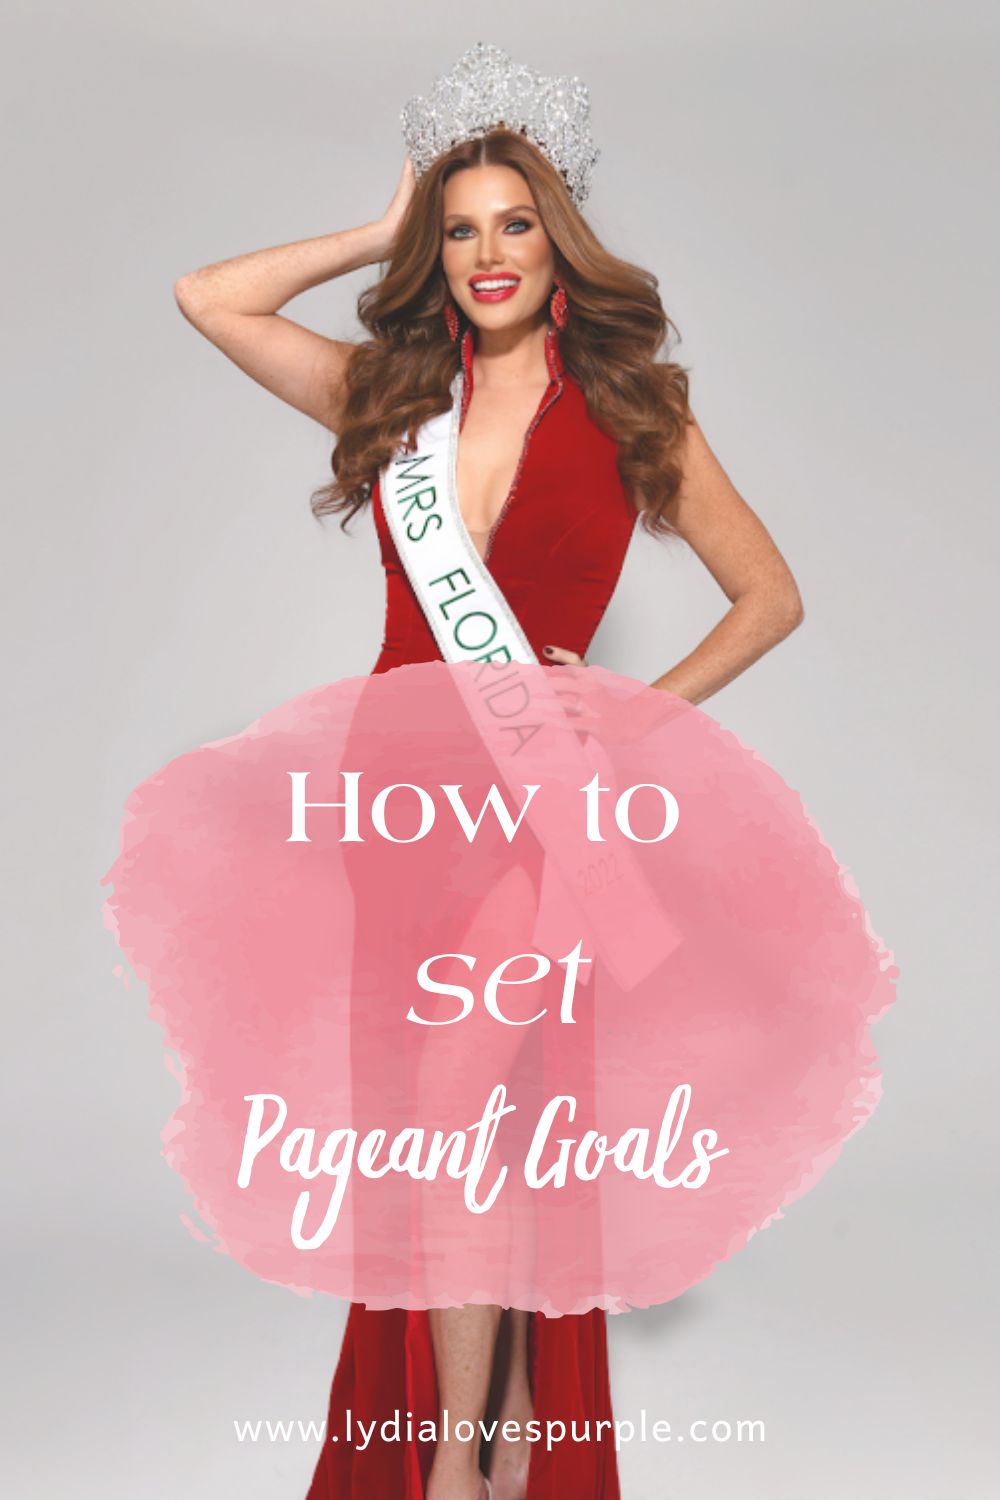 How to Set Pageant Goals